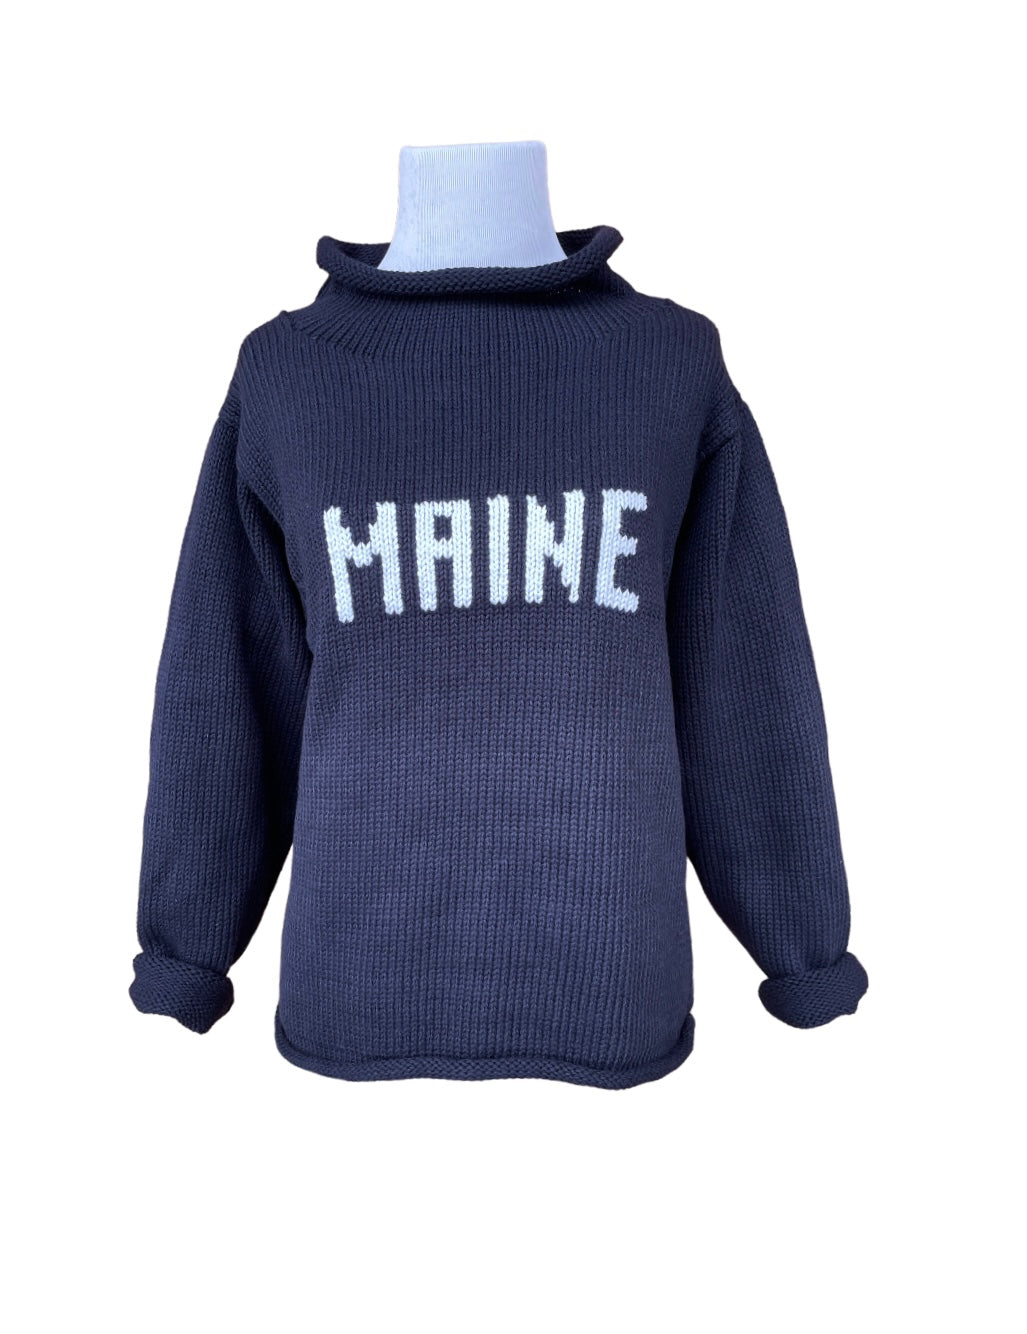 long sleeve navy adult sized sweater with white writing that says &quot;MAINE&quot;